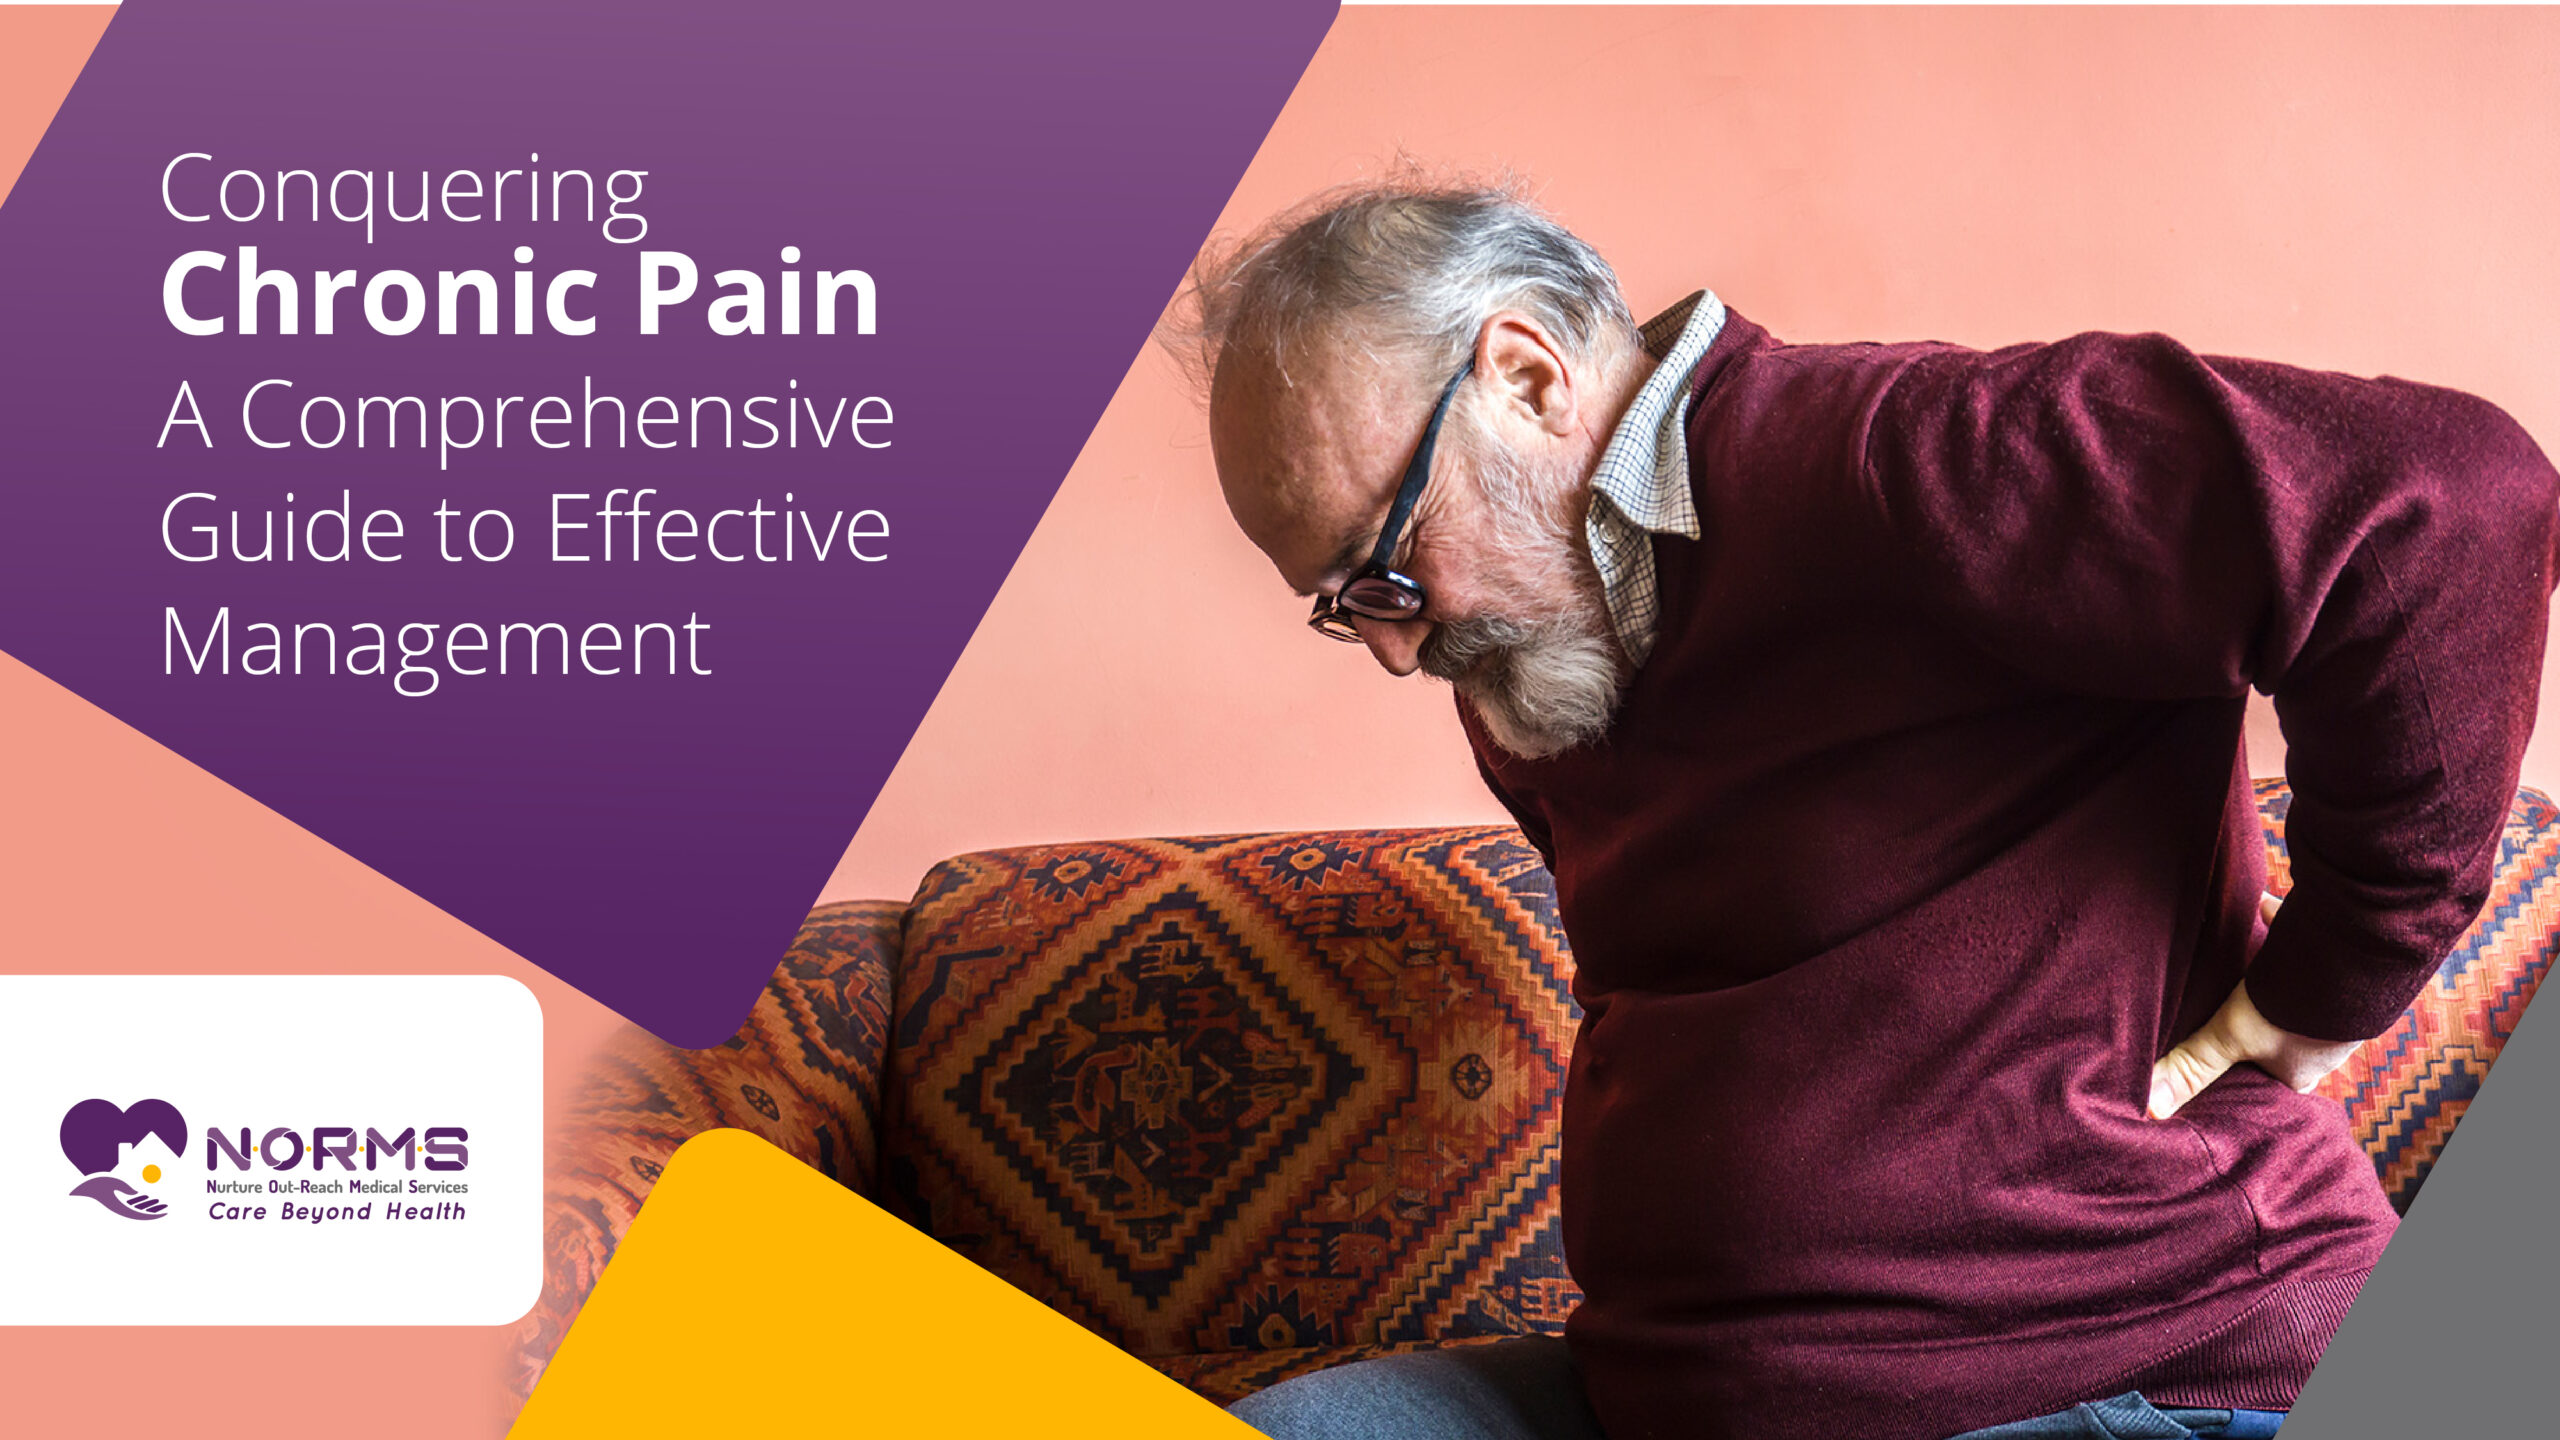 Conquering Chronic Pain: A Comprehensive Guide to Effective Management